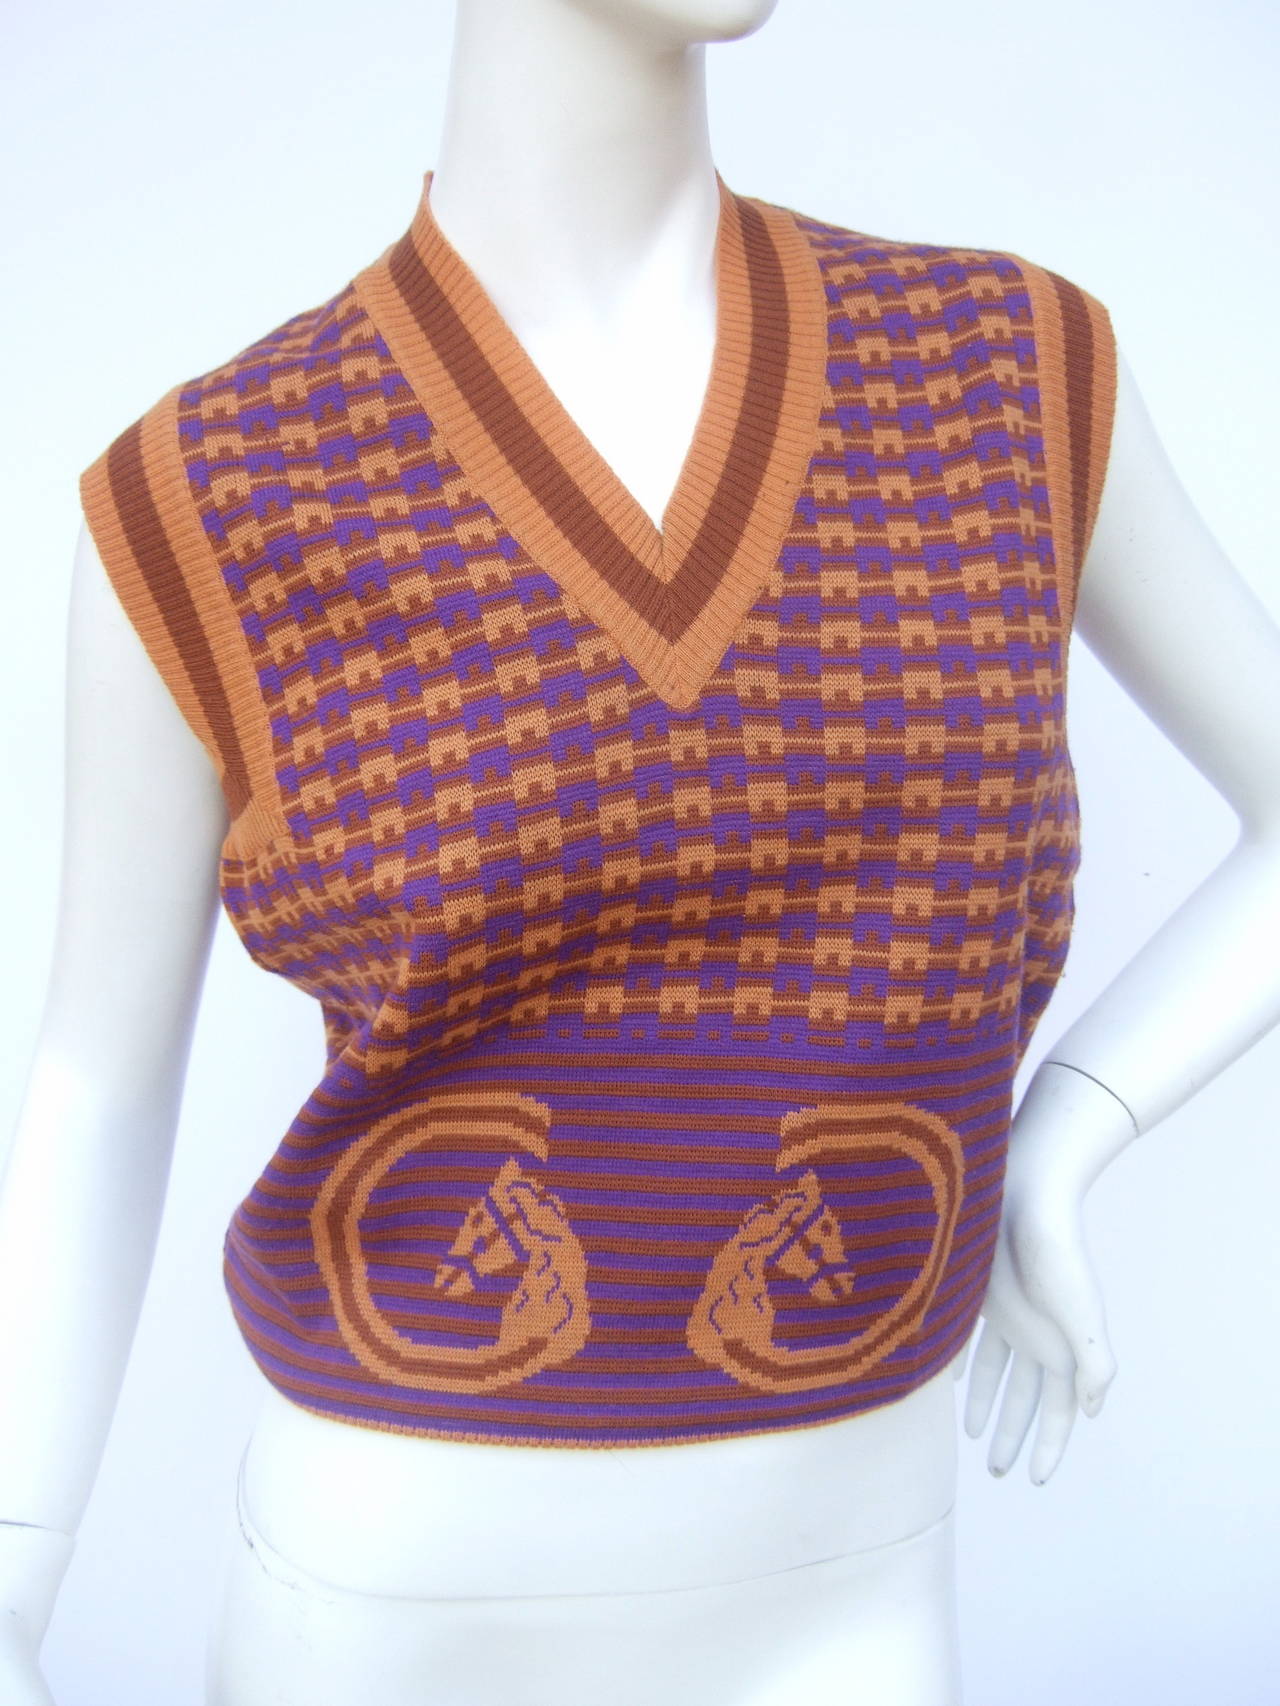 Women's Gucci Italy Equestrian Design Wool Knit Sweater Vest c 1970